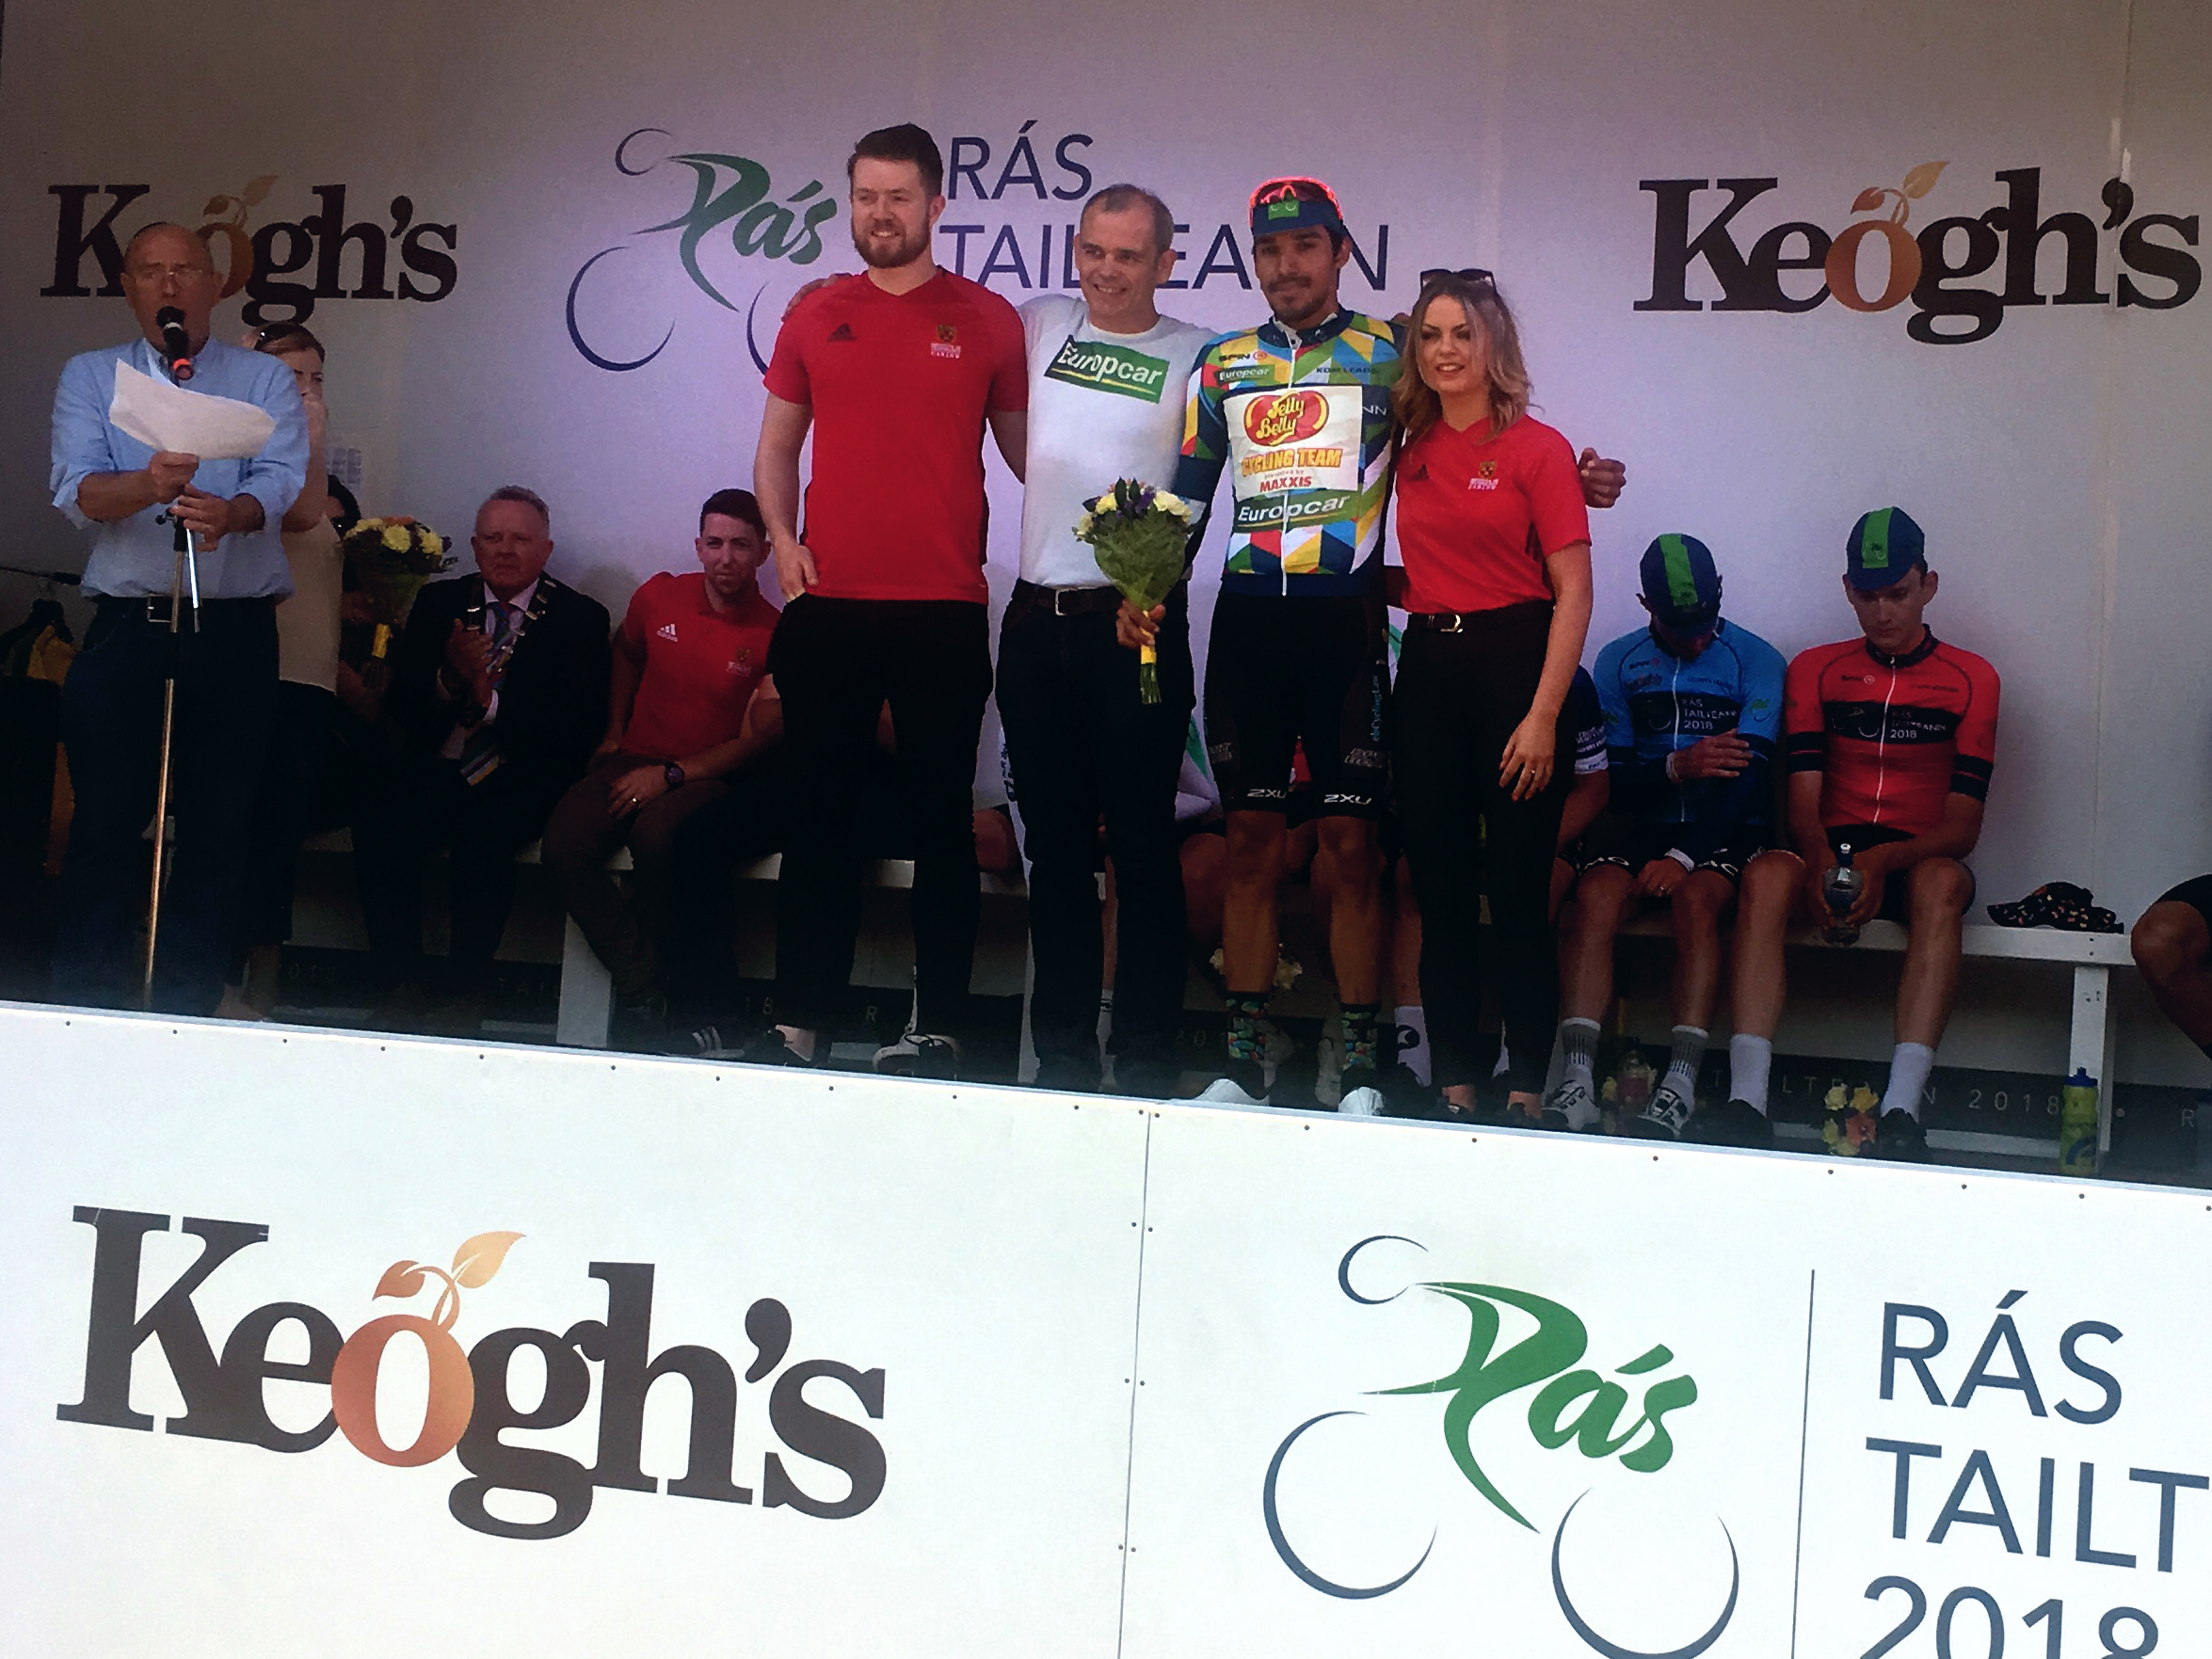 Podium Ras Tailteann with Ulises Castillo King of The Mountains, pro cycling, Ireland